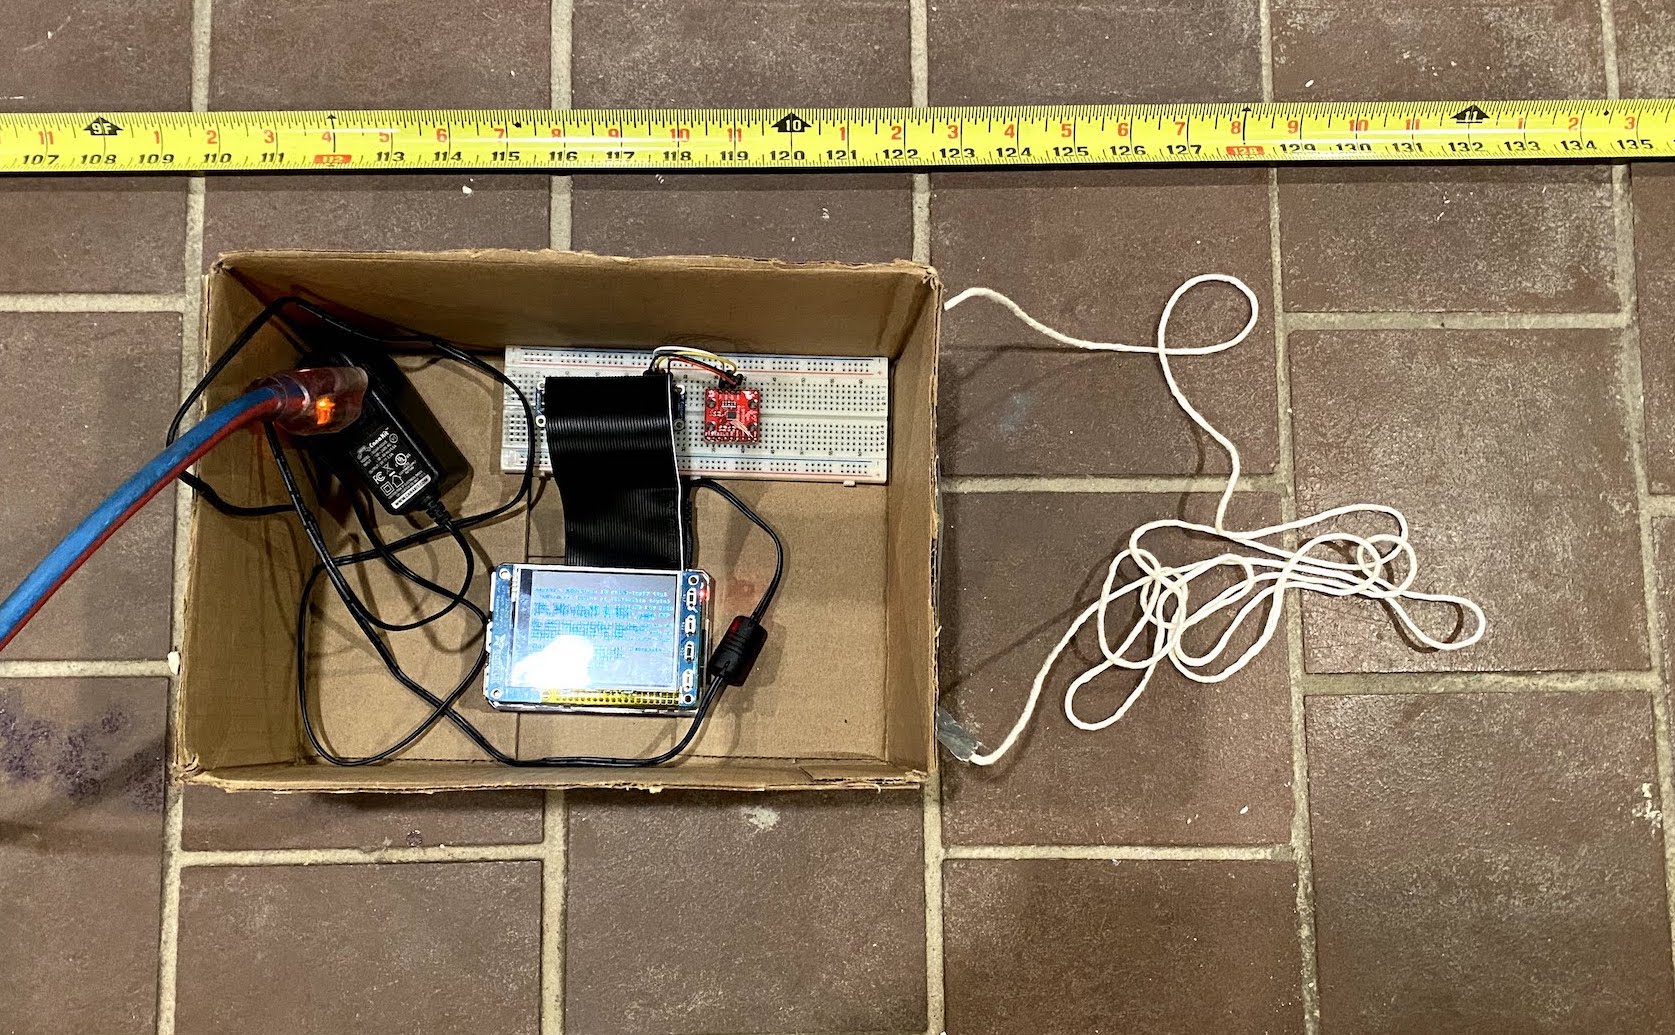 Raspberry Pi laying in a cardboard box next to a tape measure